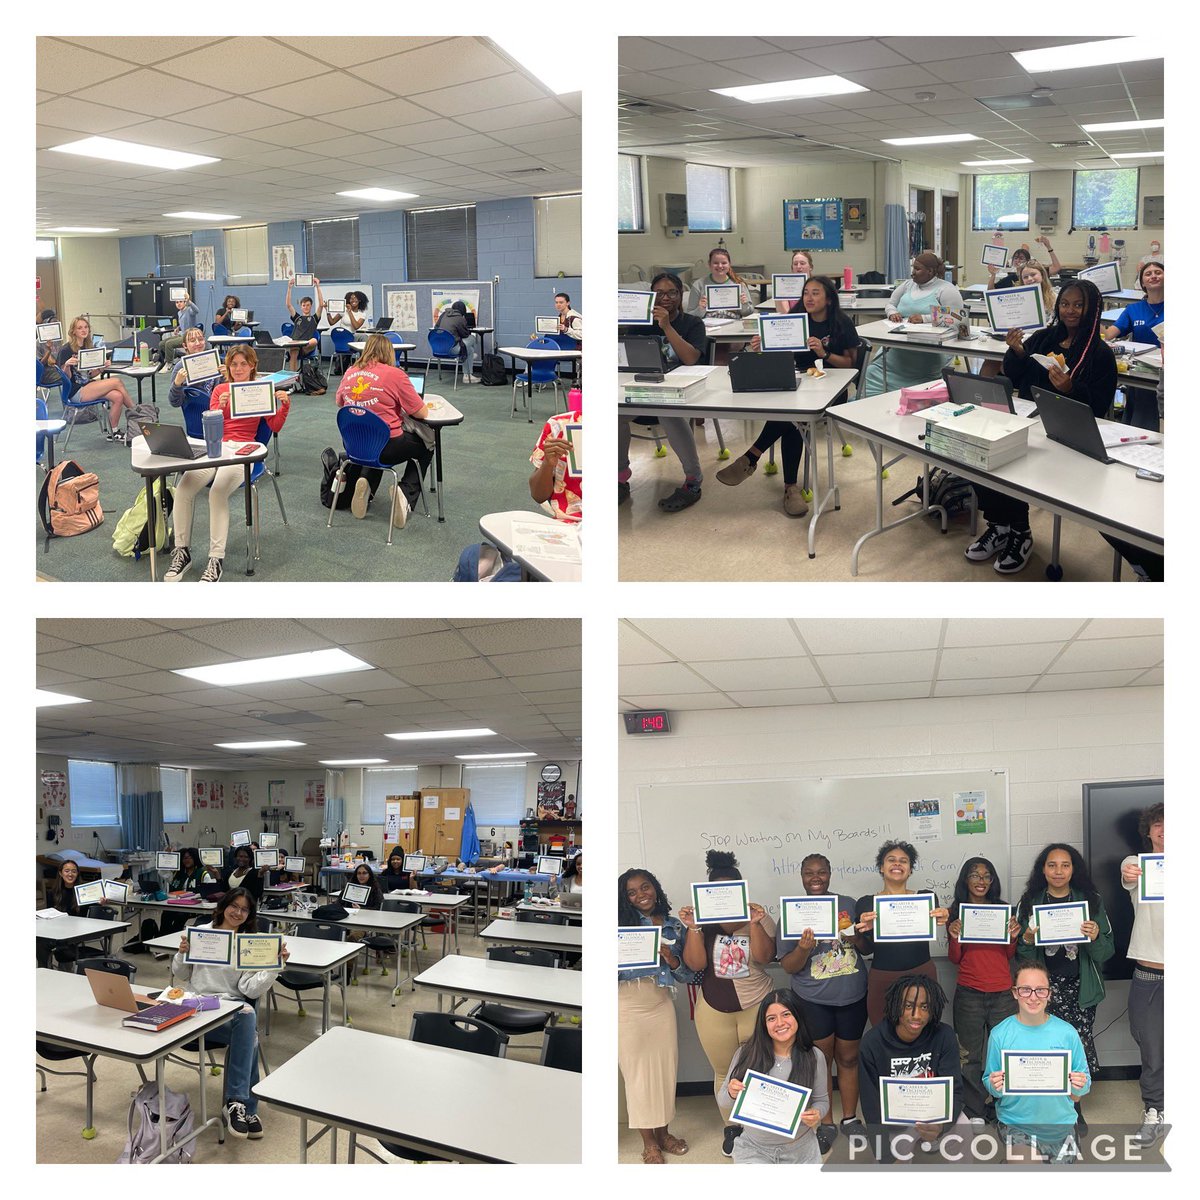 The “Honor Roll Patrol” made its rounds in the building, celebrating our scholars for their outstanding achievements for the 3rd quarter. Their hard work and dedication is truly commendable! #GettinItDone 
#NHRECCTE #LeadBoldly 
@NHREC_VA